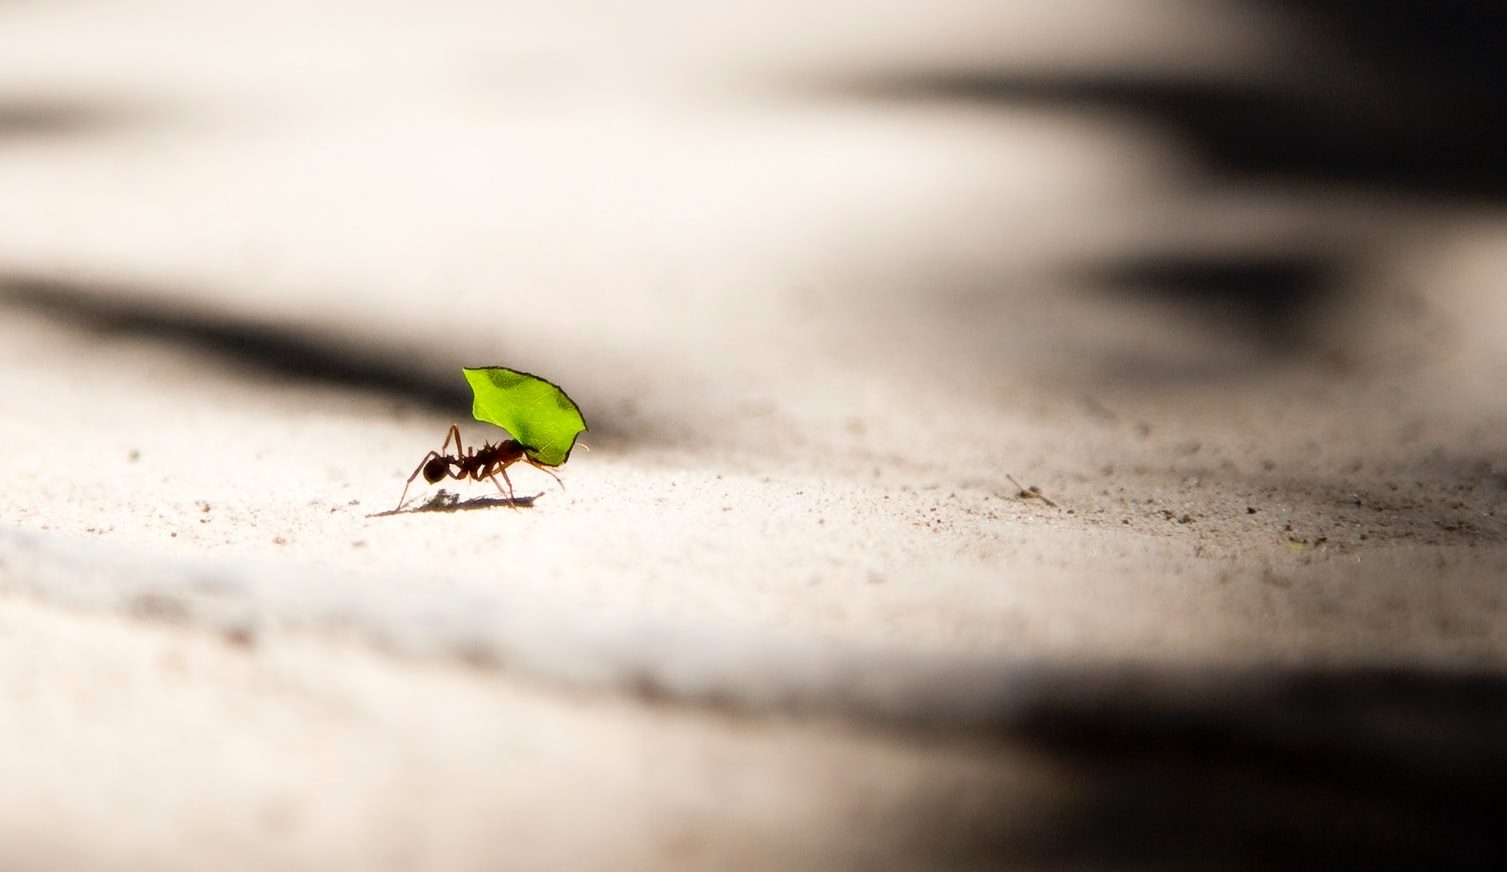 small ant carrying a piece of leaf